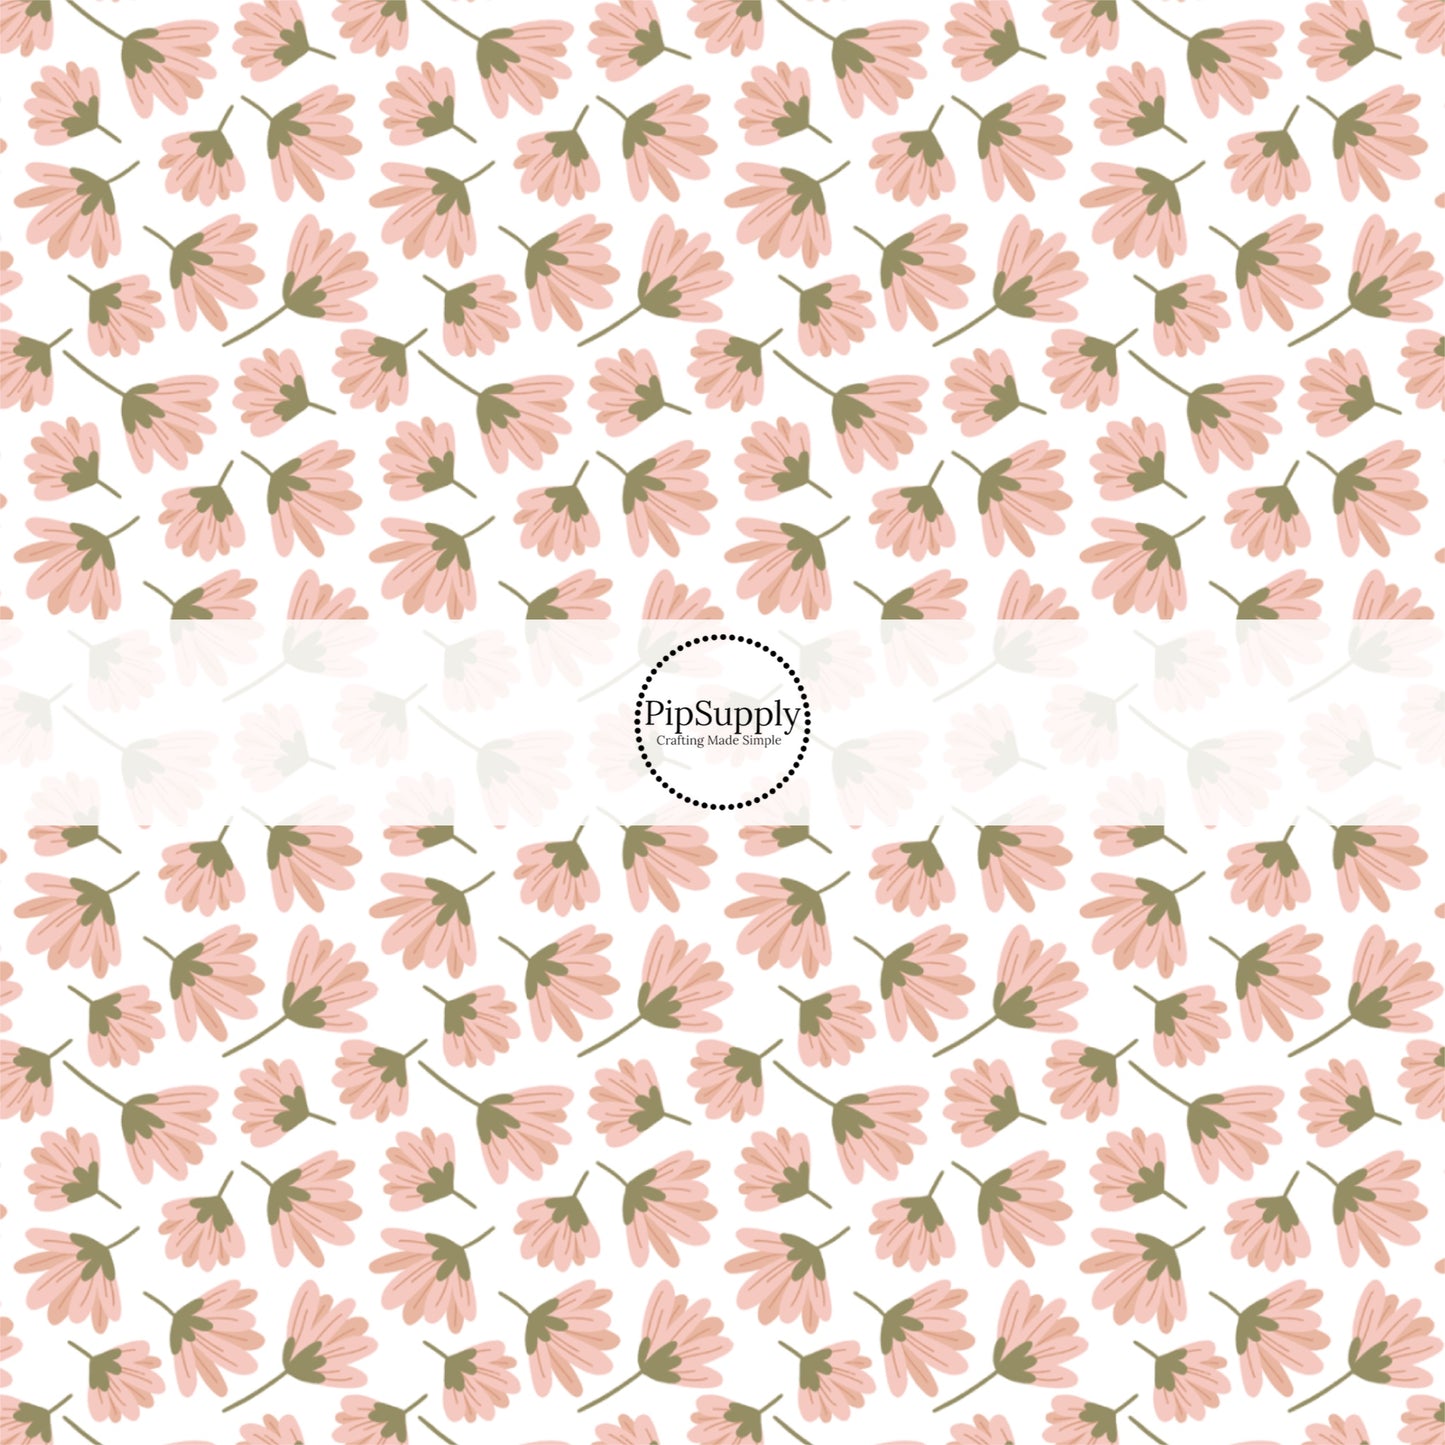 This summer fabric by the yard features pink wildflowers on white. This fun summer themed fabric can be used for all your sewing and crafting needs!